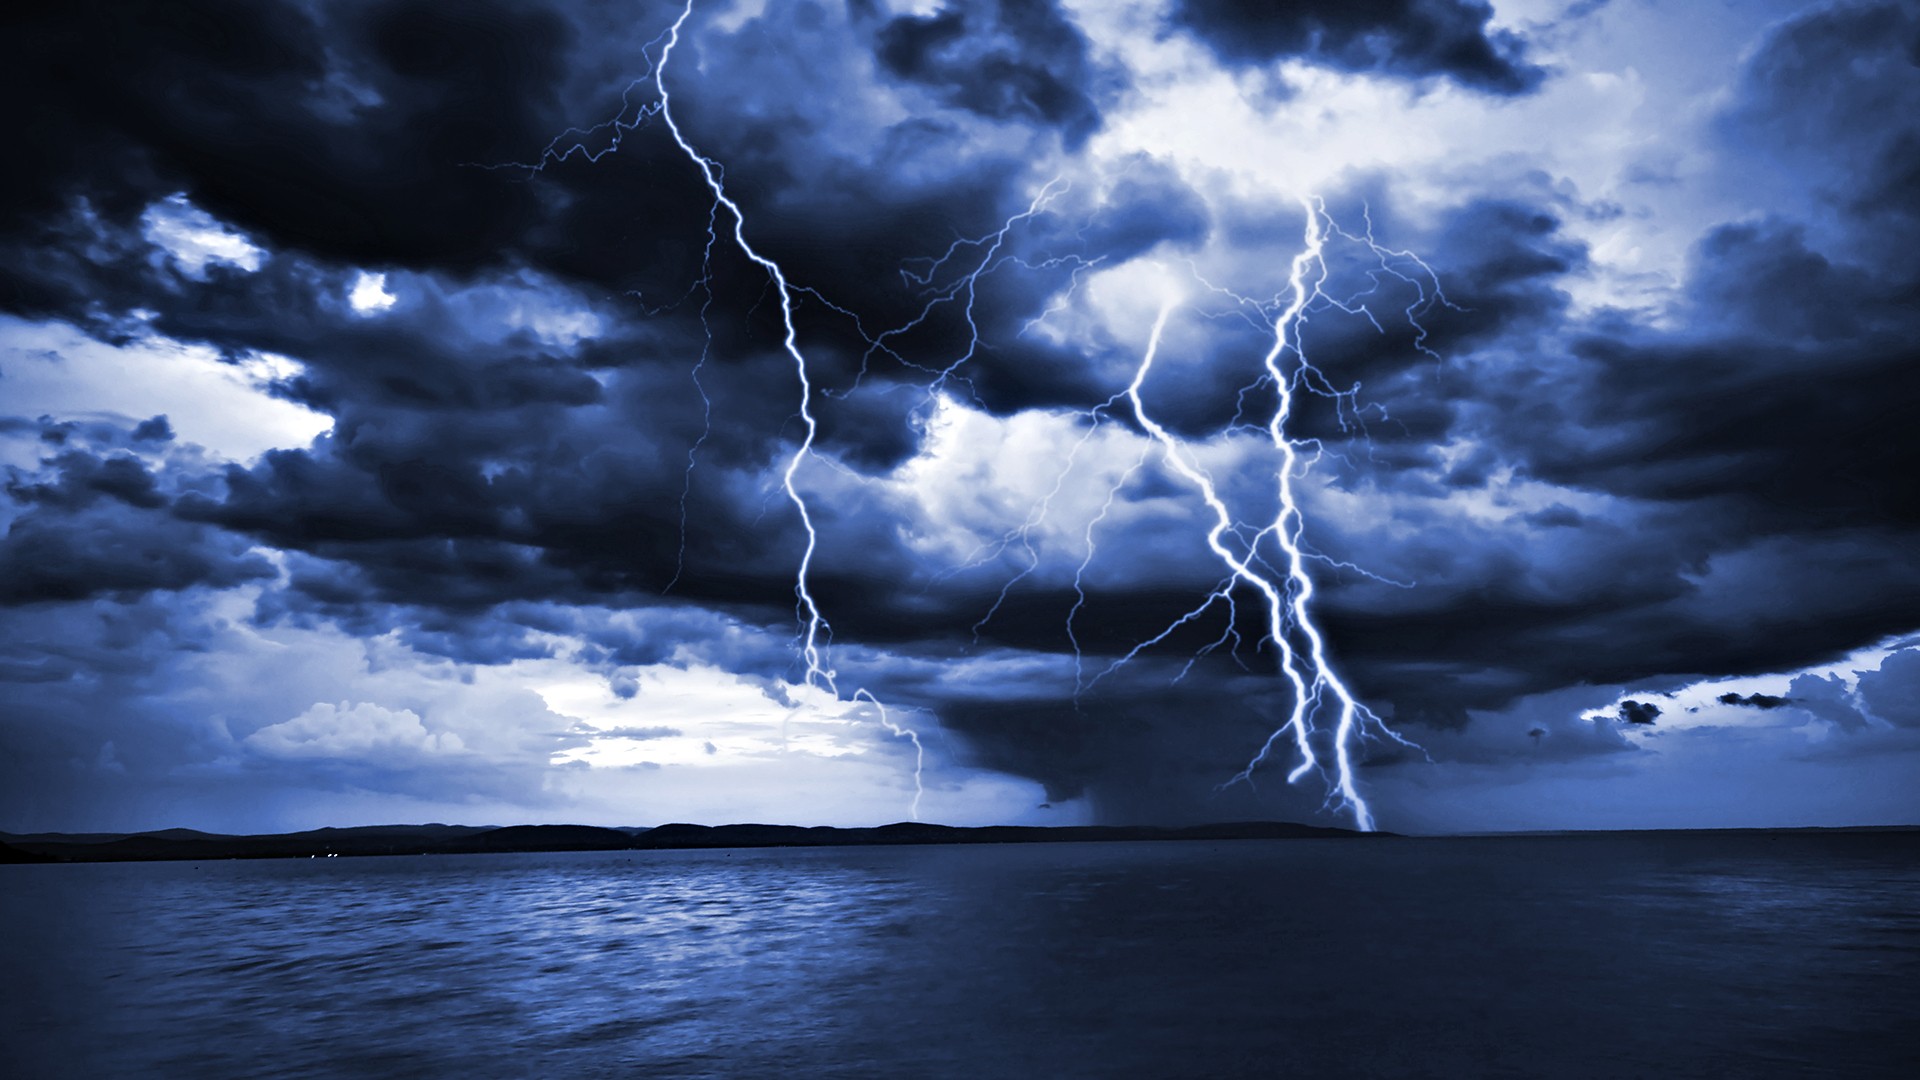 General 1920x1080 photography sea water lightning storm sky clouds